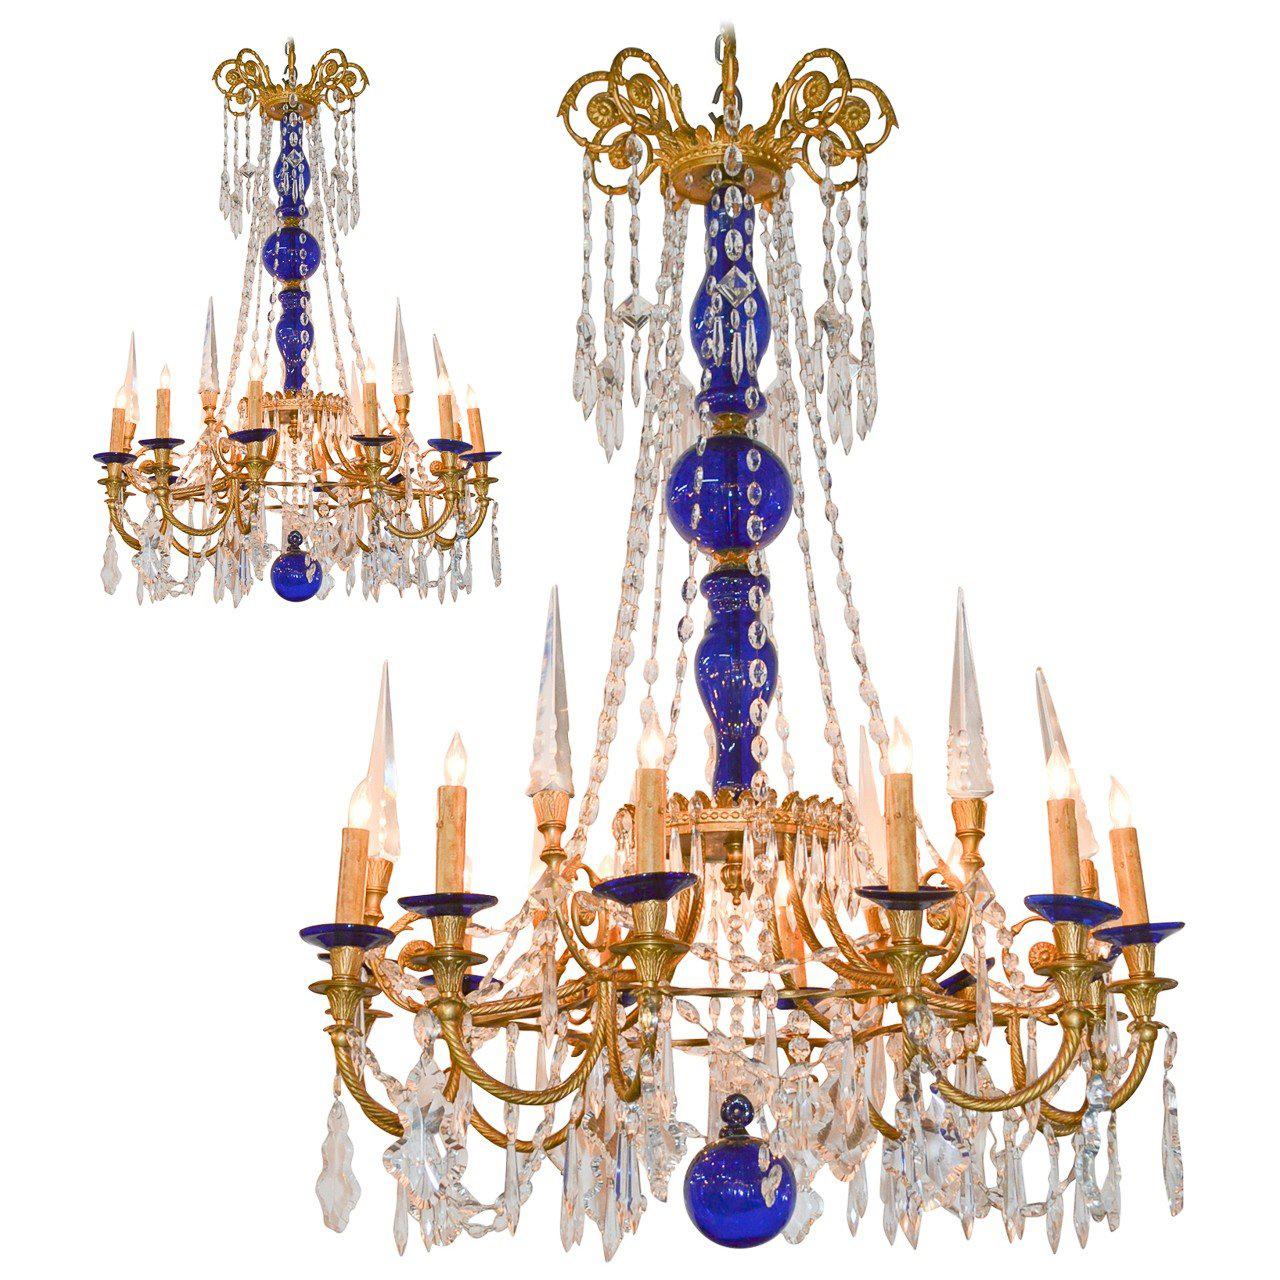 19th Century Pair of Russian Bronze, Crystal, and Cobalt Chandeliers